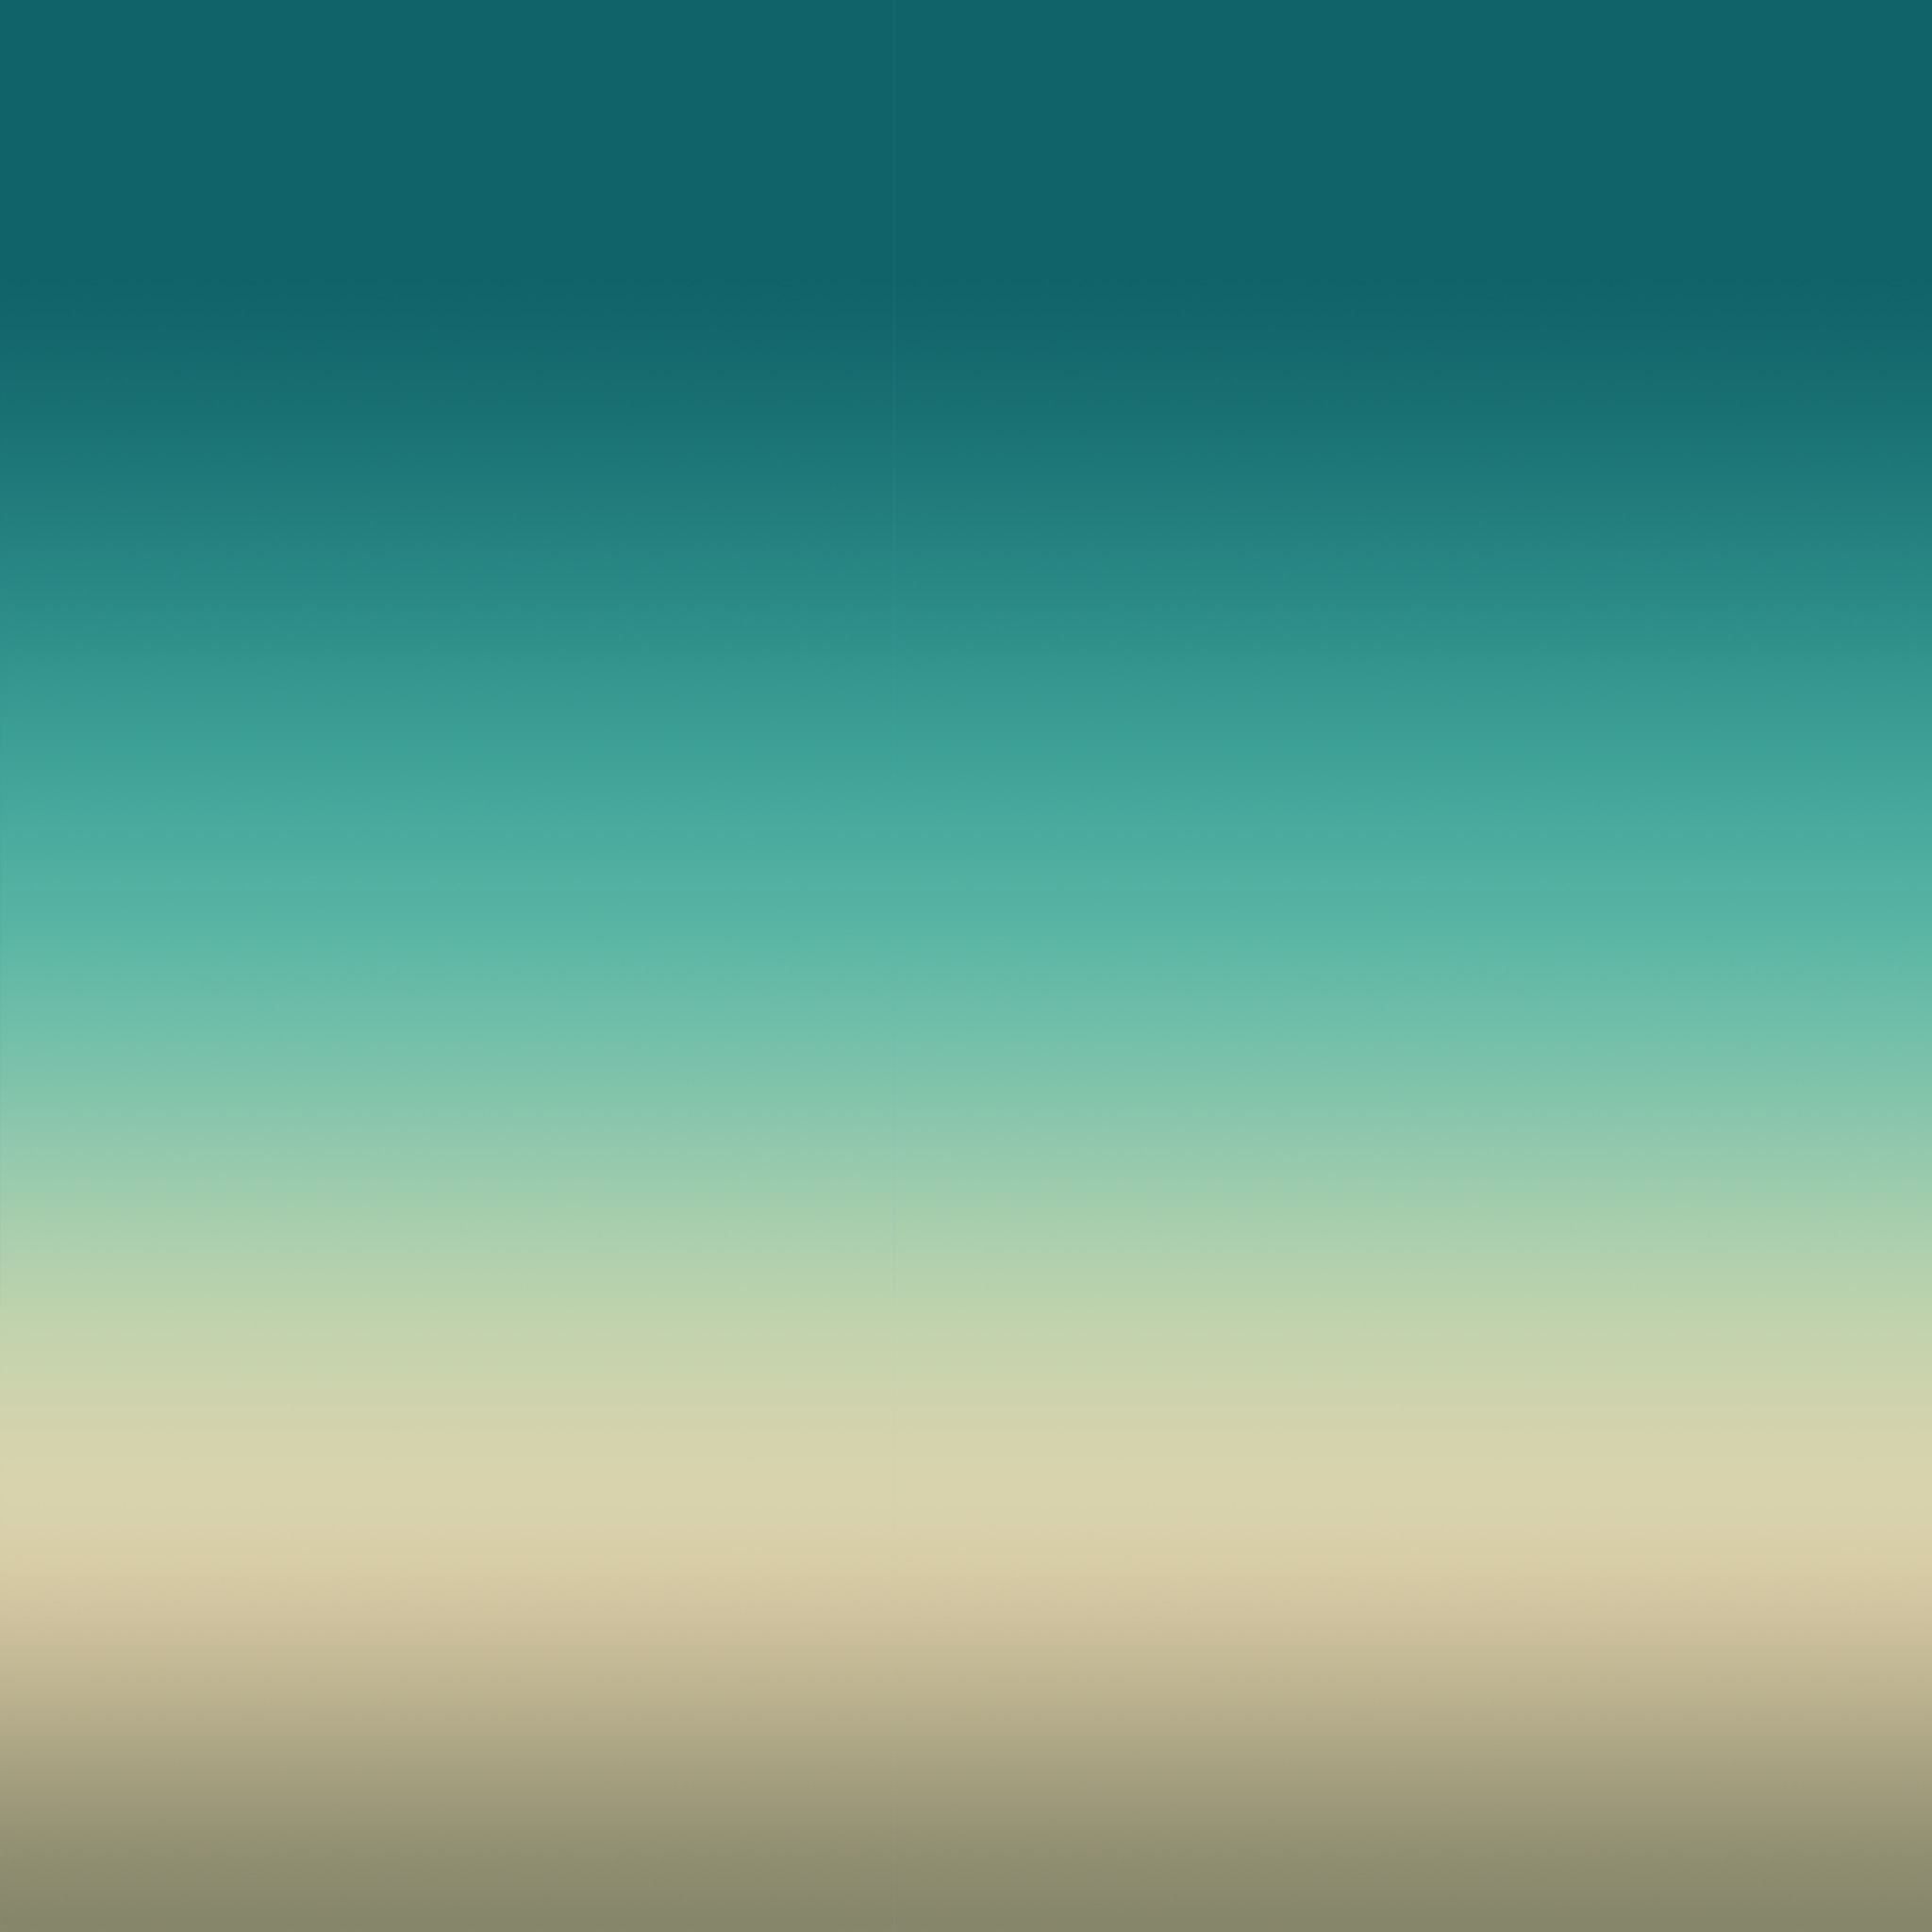 Green Gradient Basic - Wallpapers Central